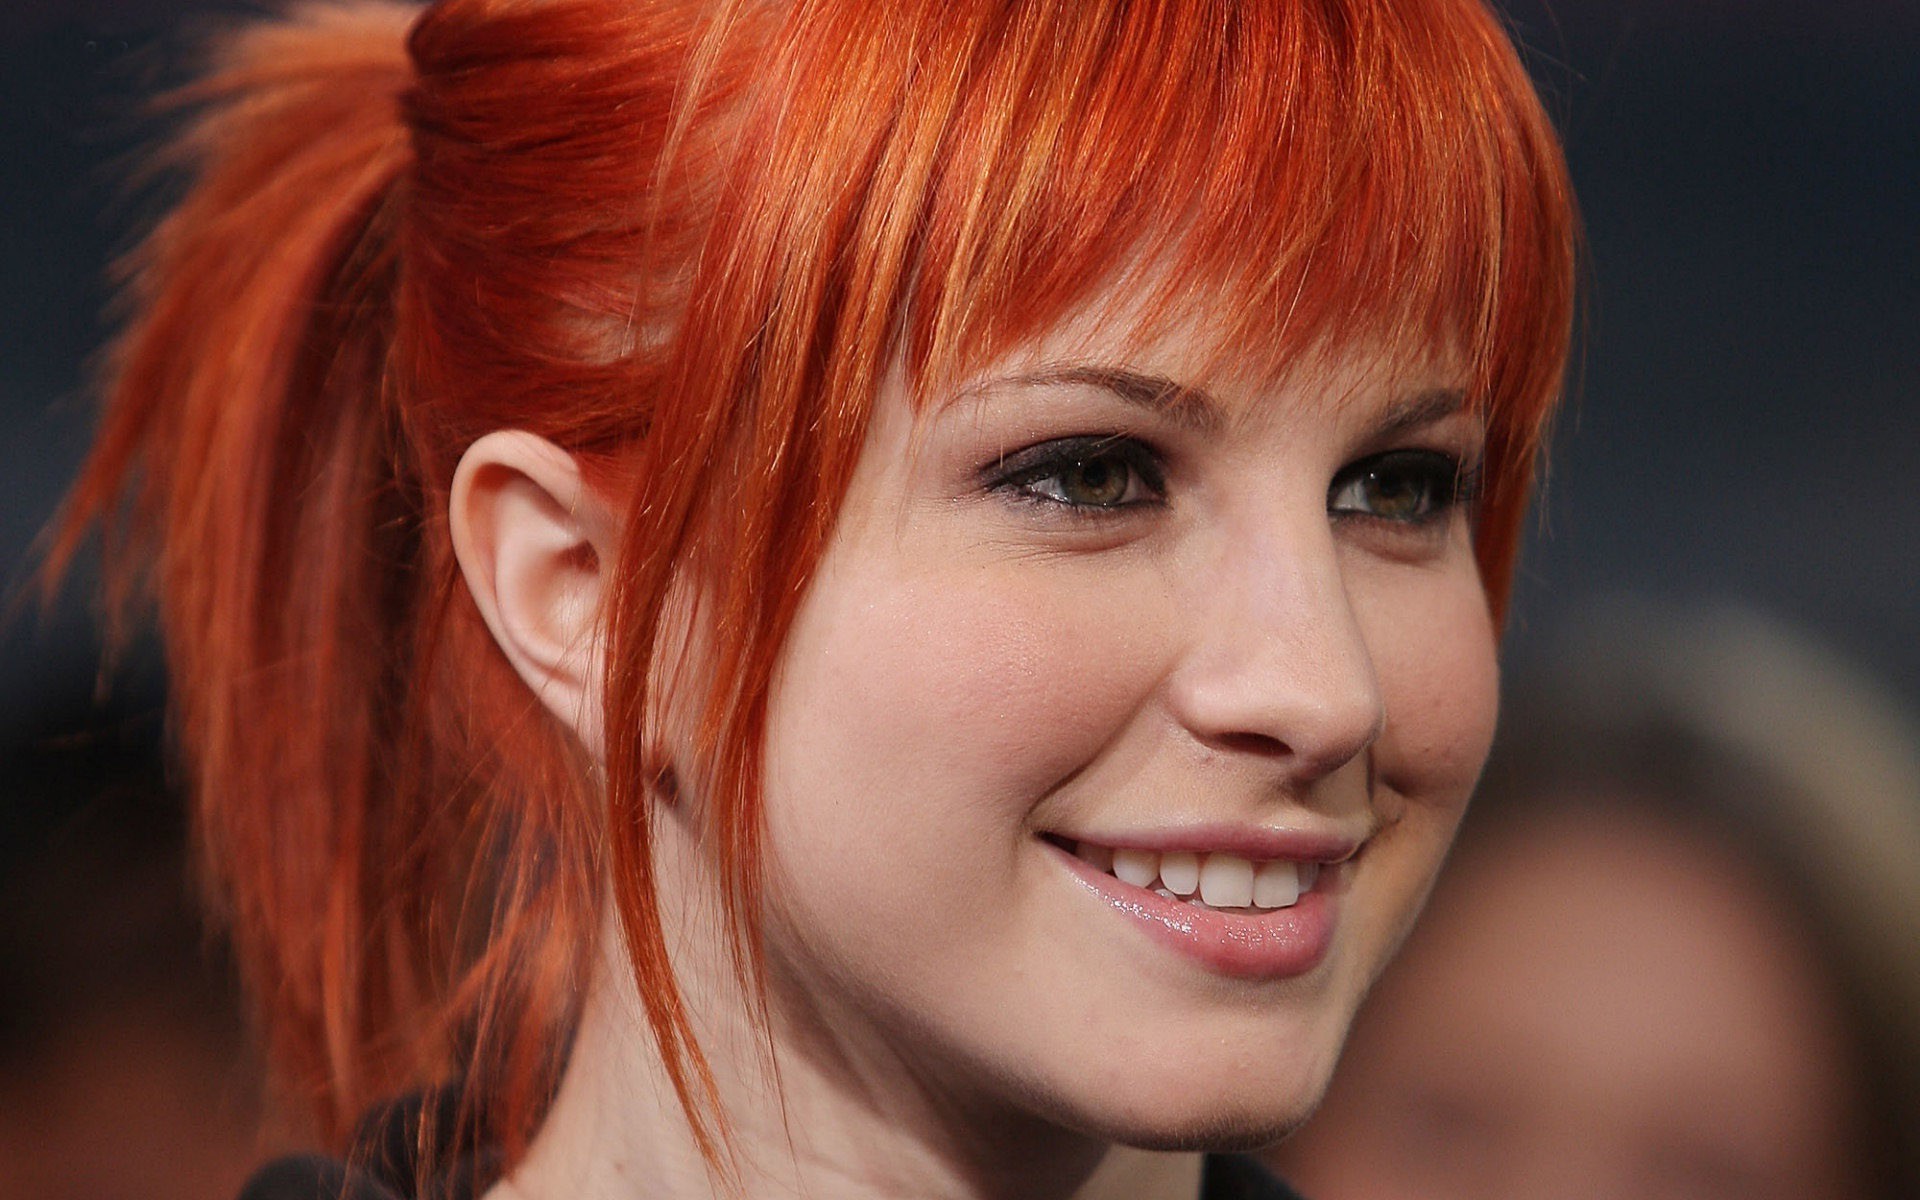 Hayley Williams Paramore Redhead Women Green Eyes Smiling People 1920x1200